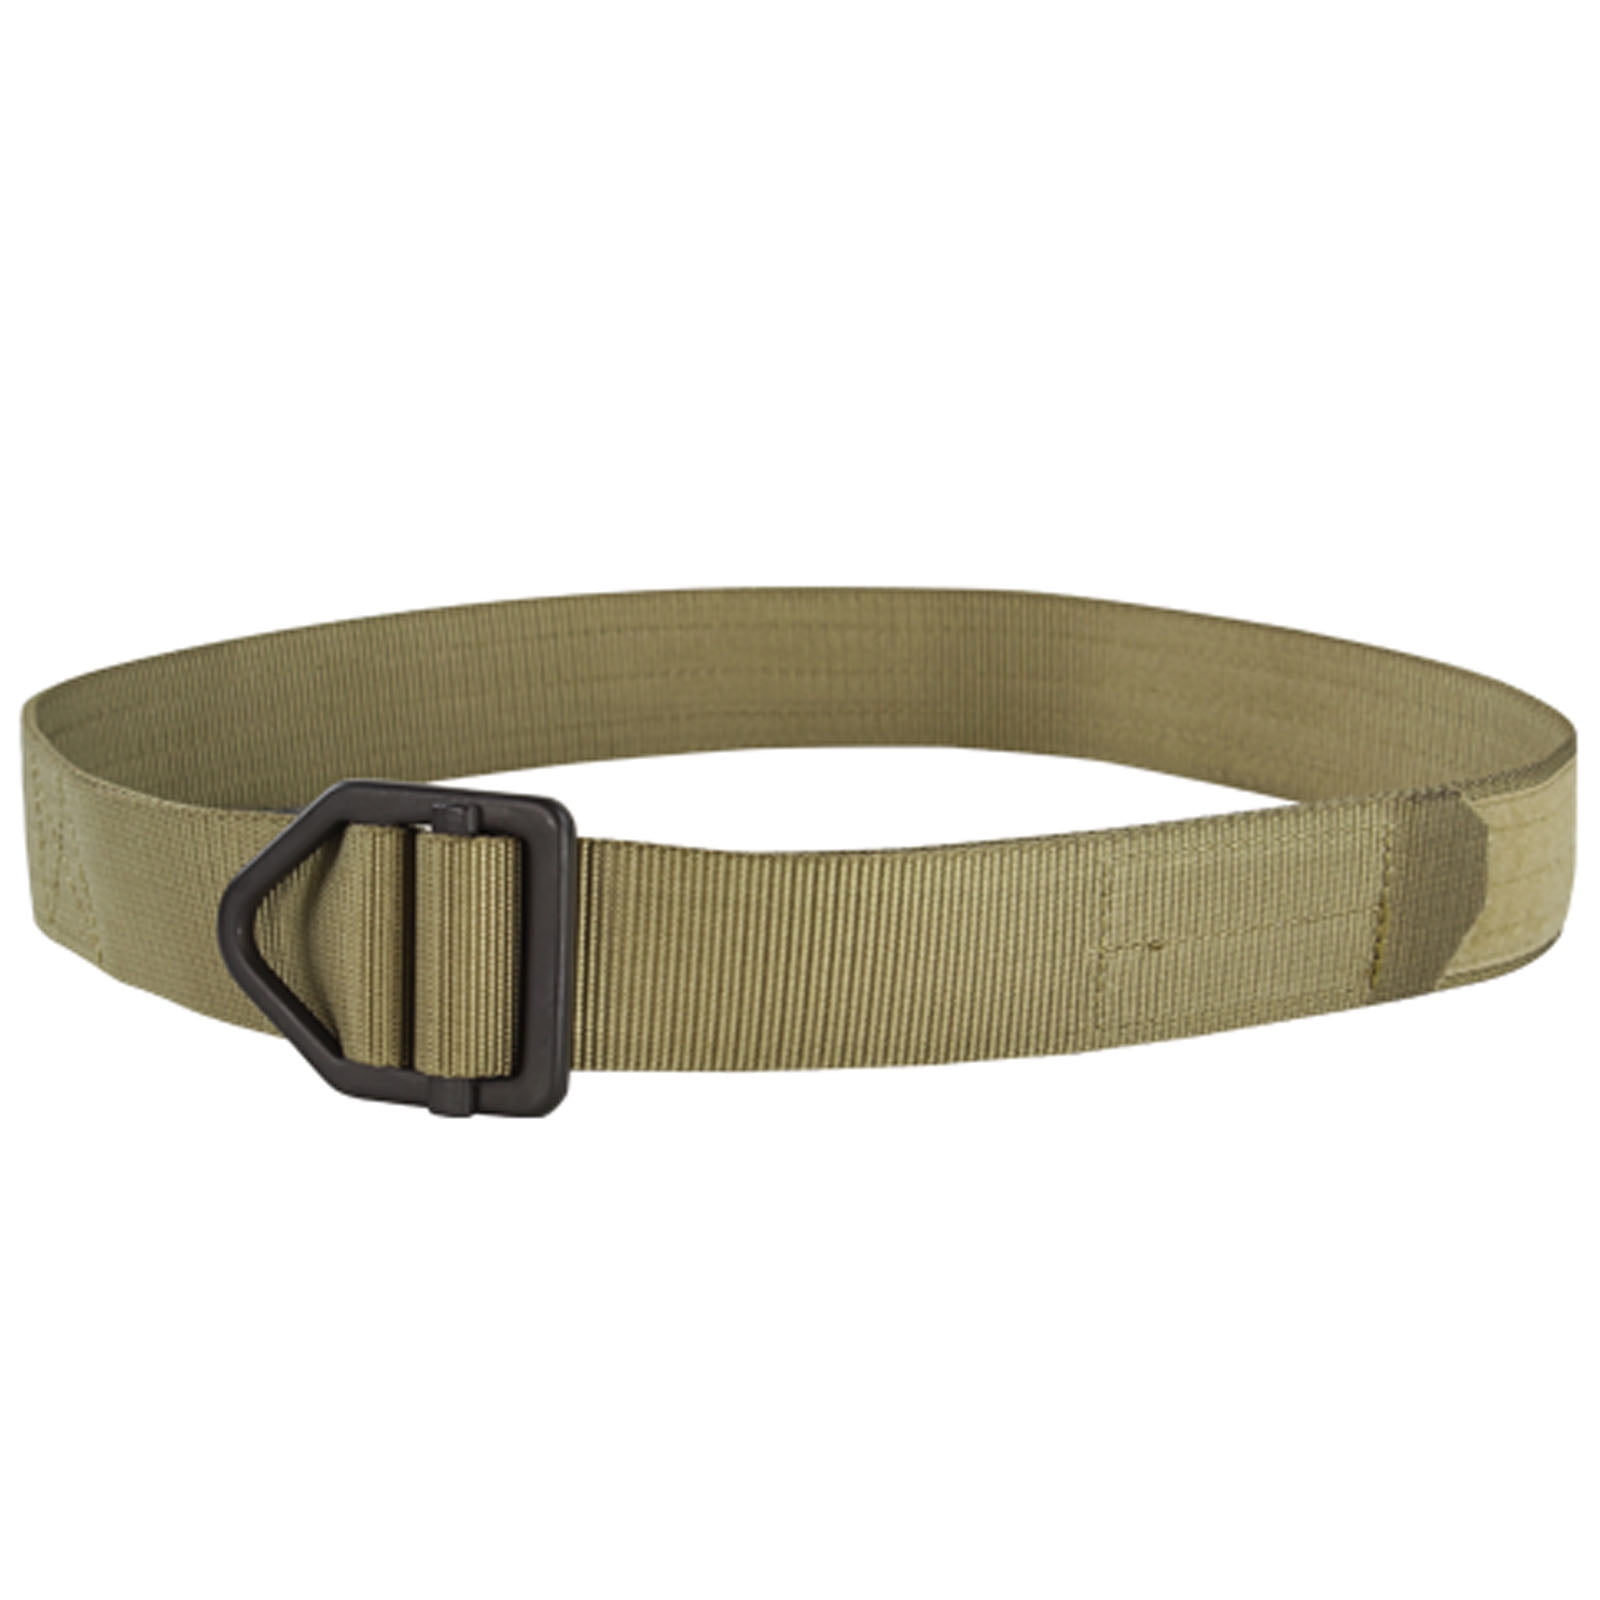 Propper Double Layer 1.5" Nylon Webbing 180 Reversible Tactical Military Belt 